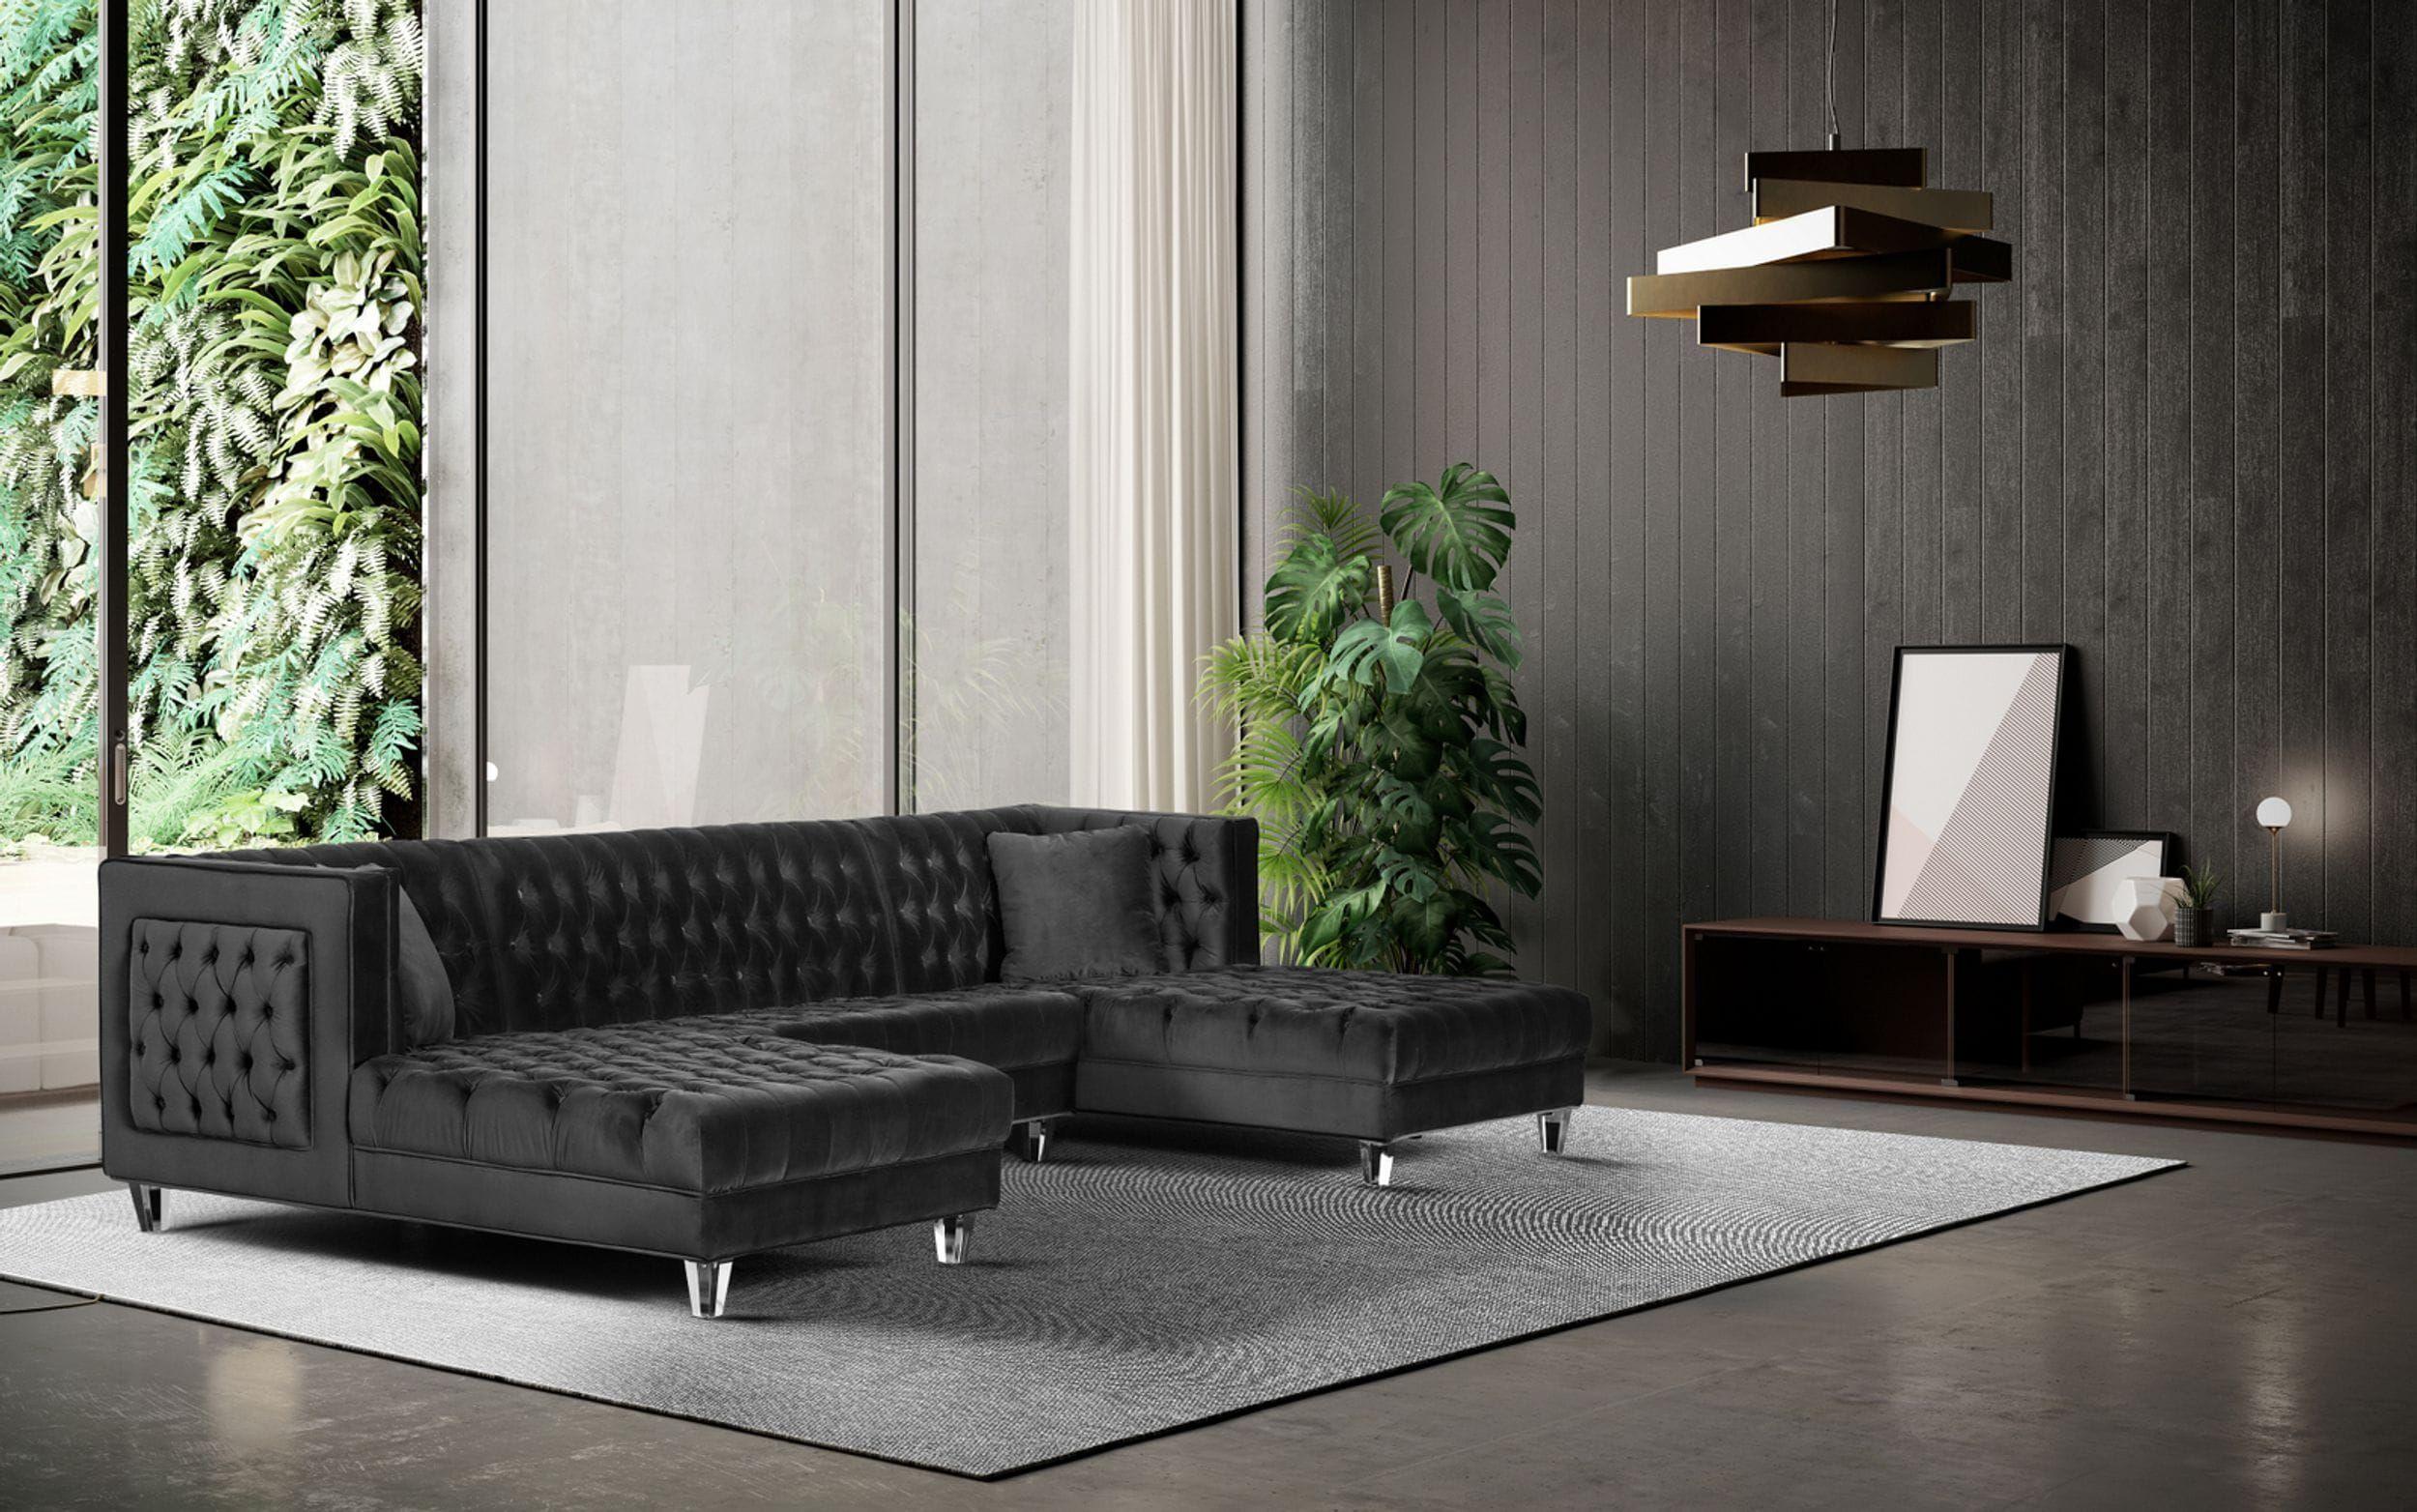 Contemporary, Modern Sectional Sofa VG2T1123-GRY-SECT VG2T1123-GRY-SECT in Gray Velvet